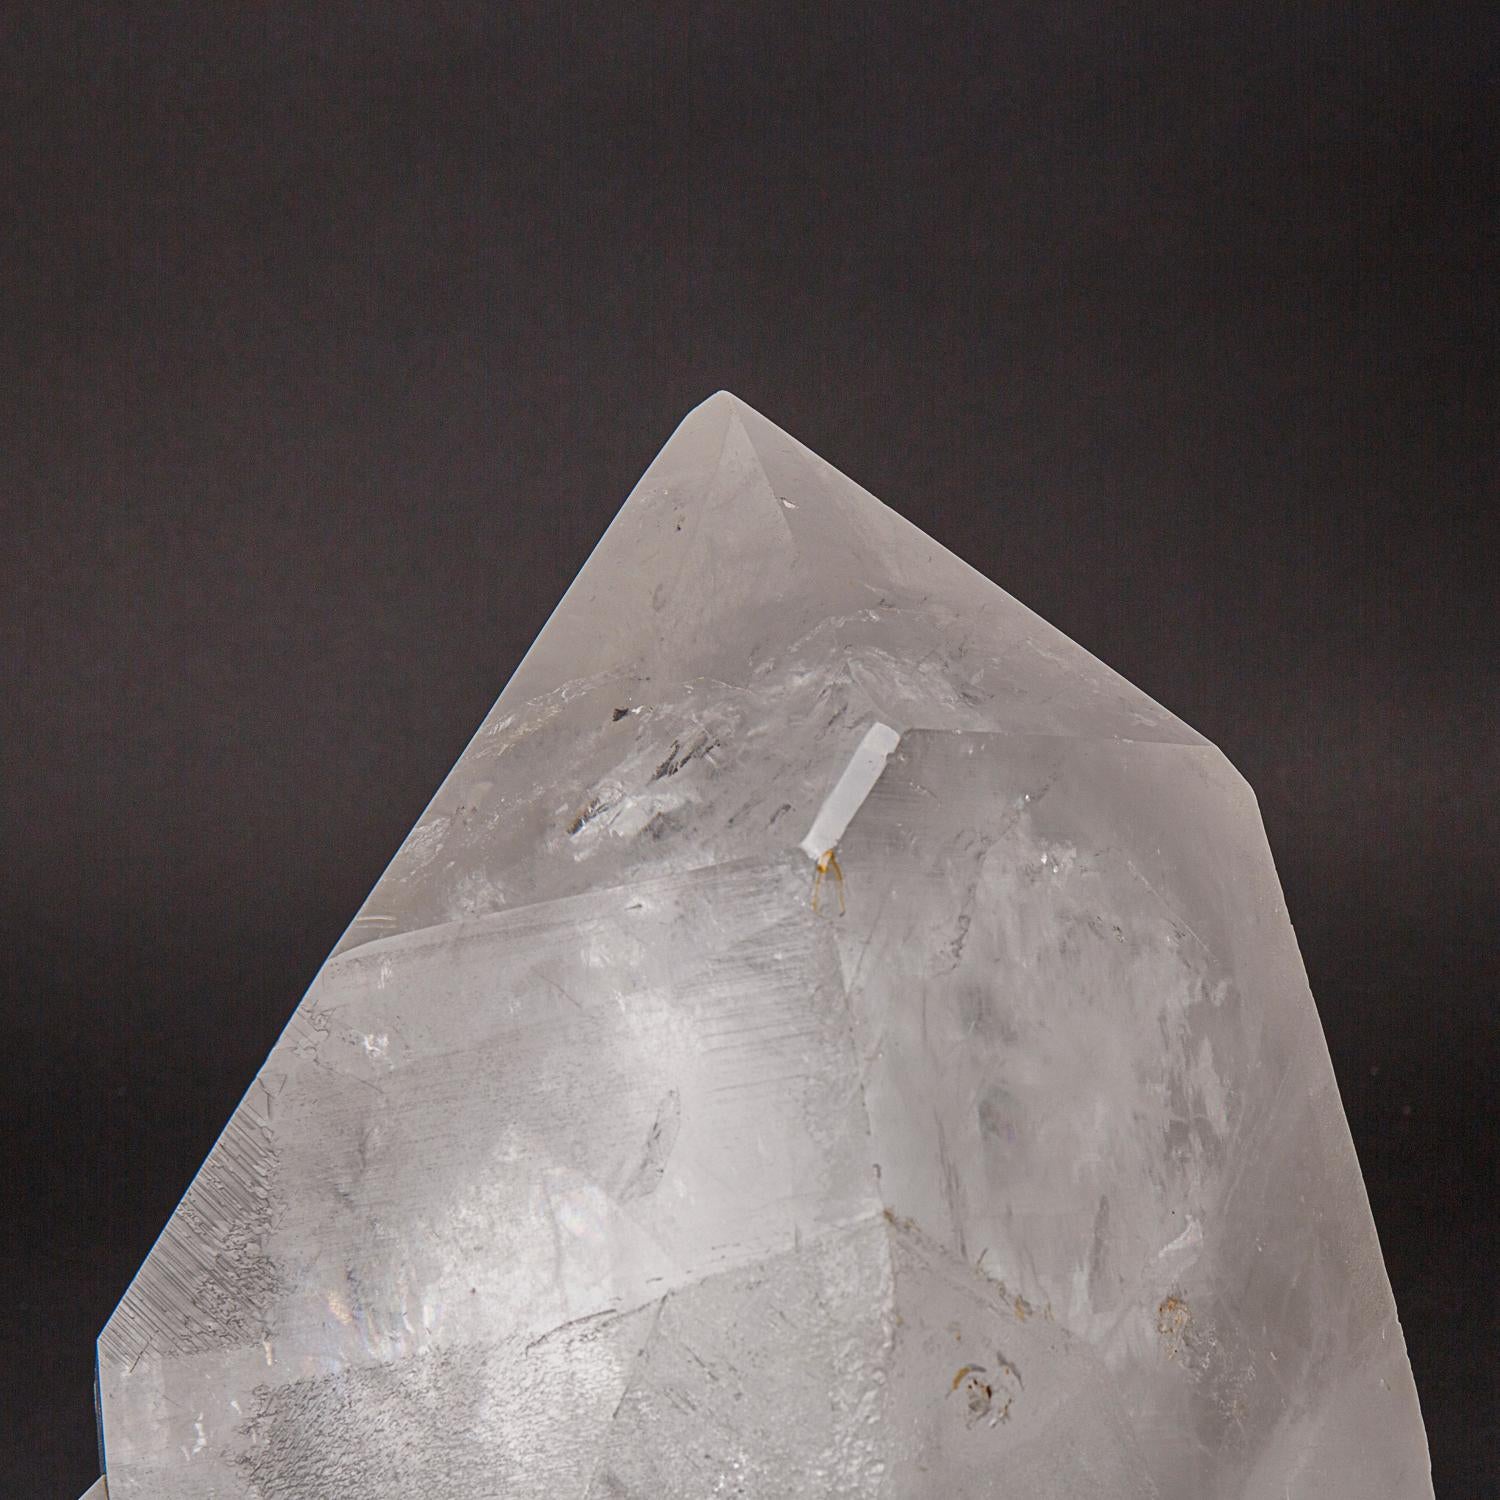 This Genuine Clear Quartz Crystal Cluster Point from Brazil weighs 61.5 lbs and is crafted from premium, see-through quartz crystals. With a complete termination and a shiny, reflective surface, this crystal serves as an excellent present or a